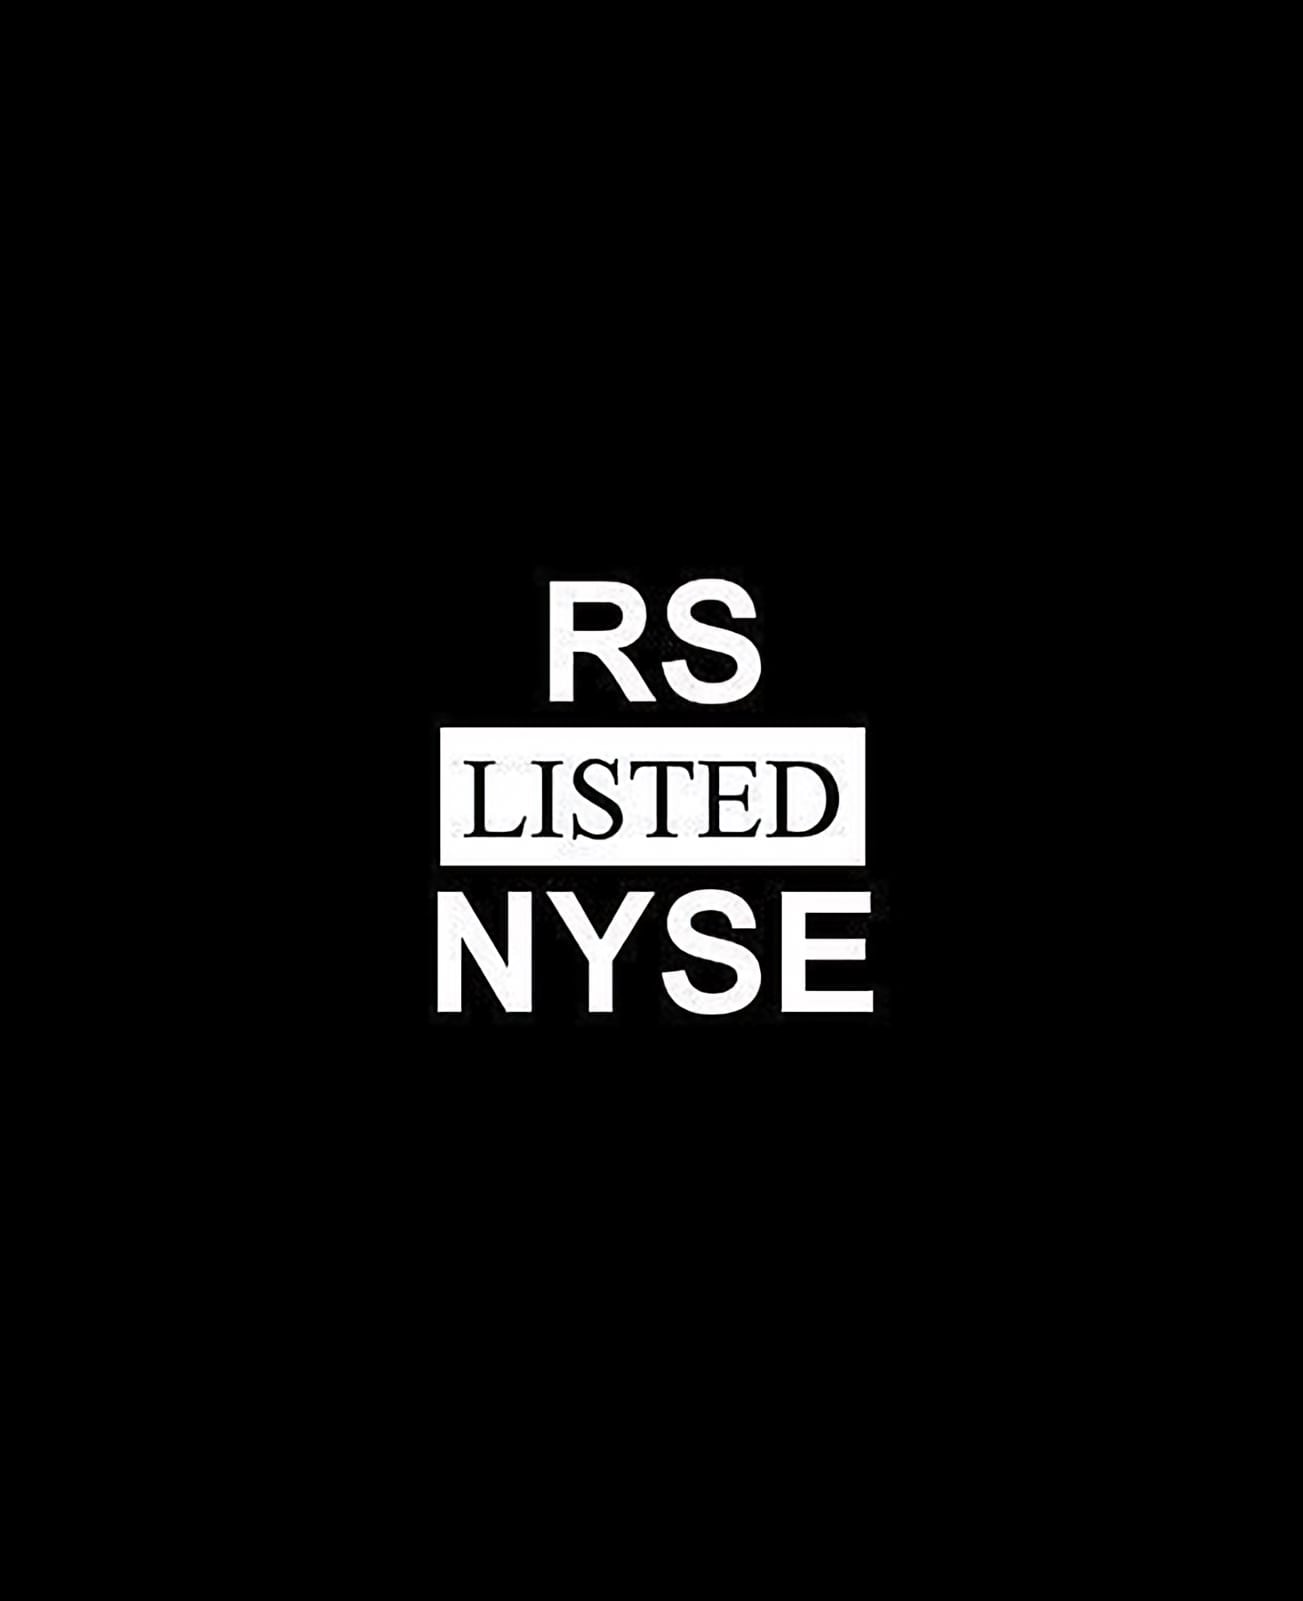 Reliance Steel listed on the NYSE